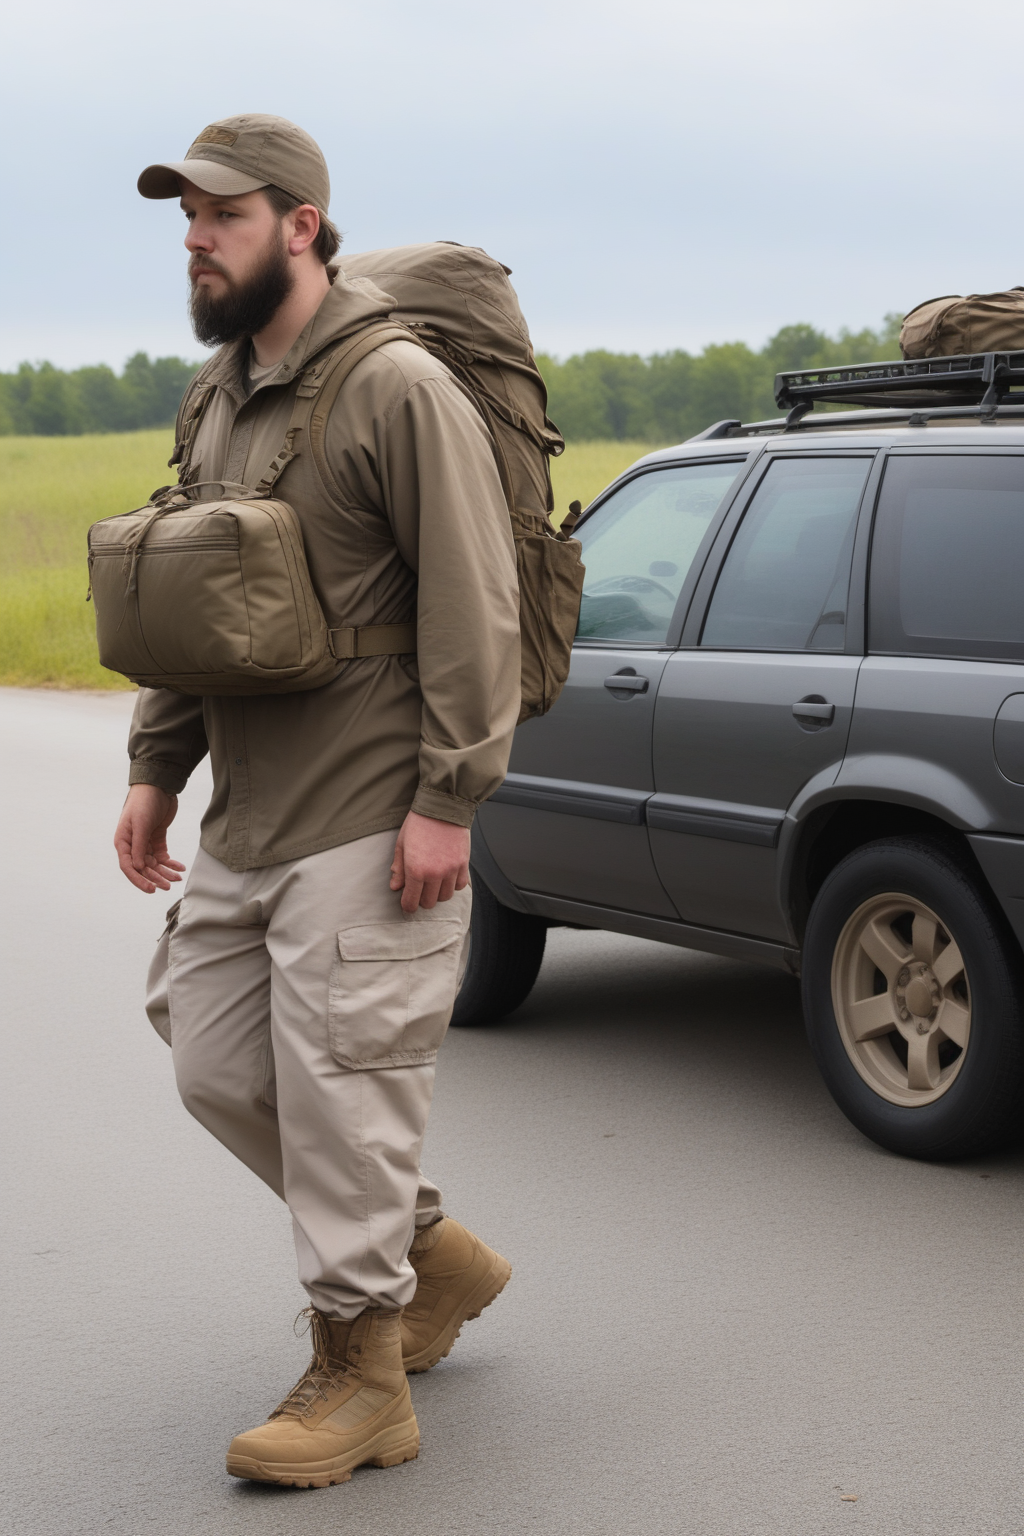 Everyday Preparedness: Why Being a “Prepper” Matters More Than You Think